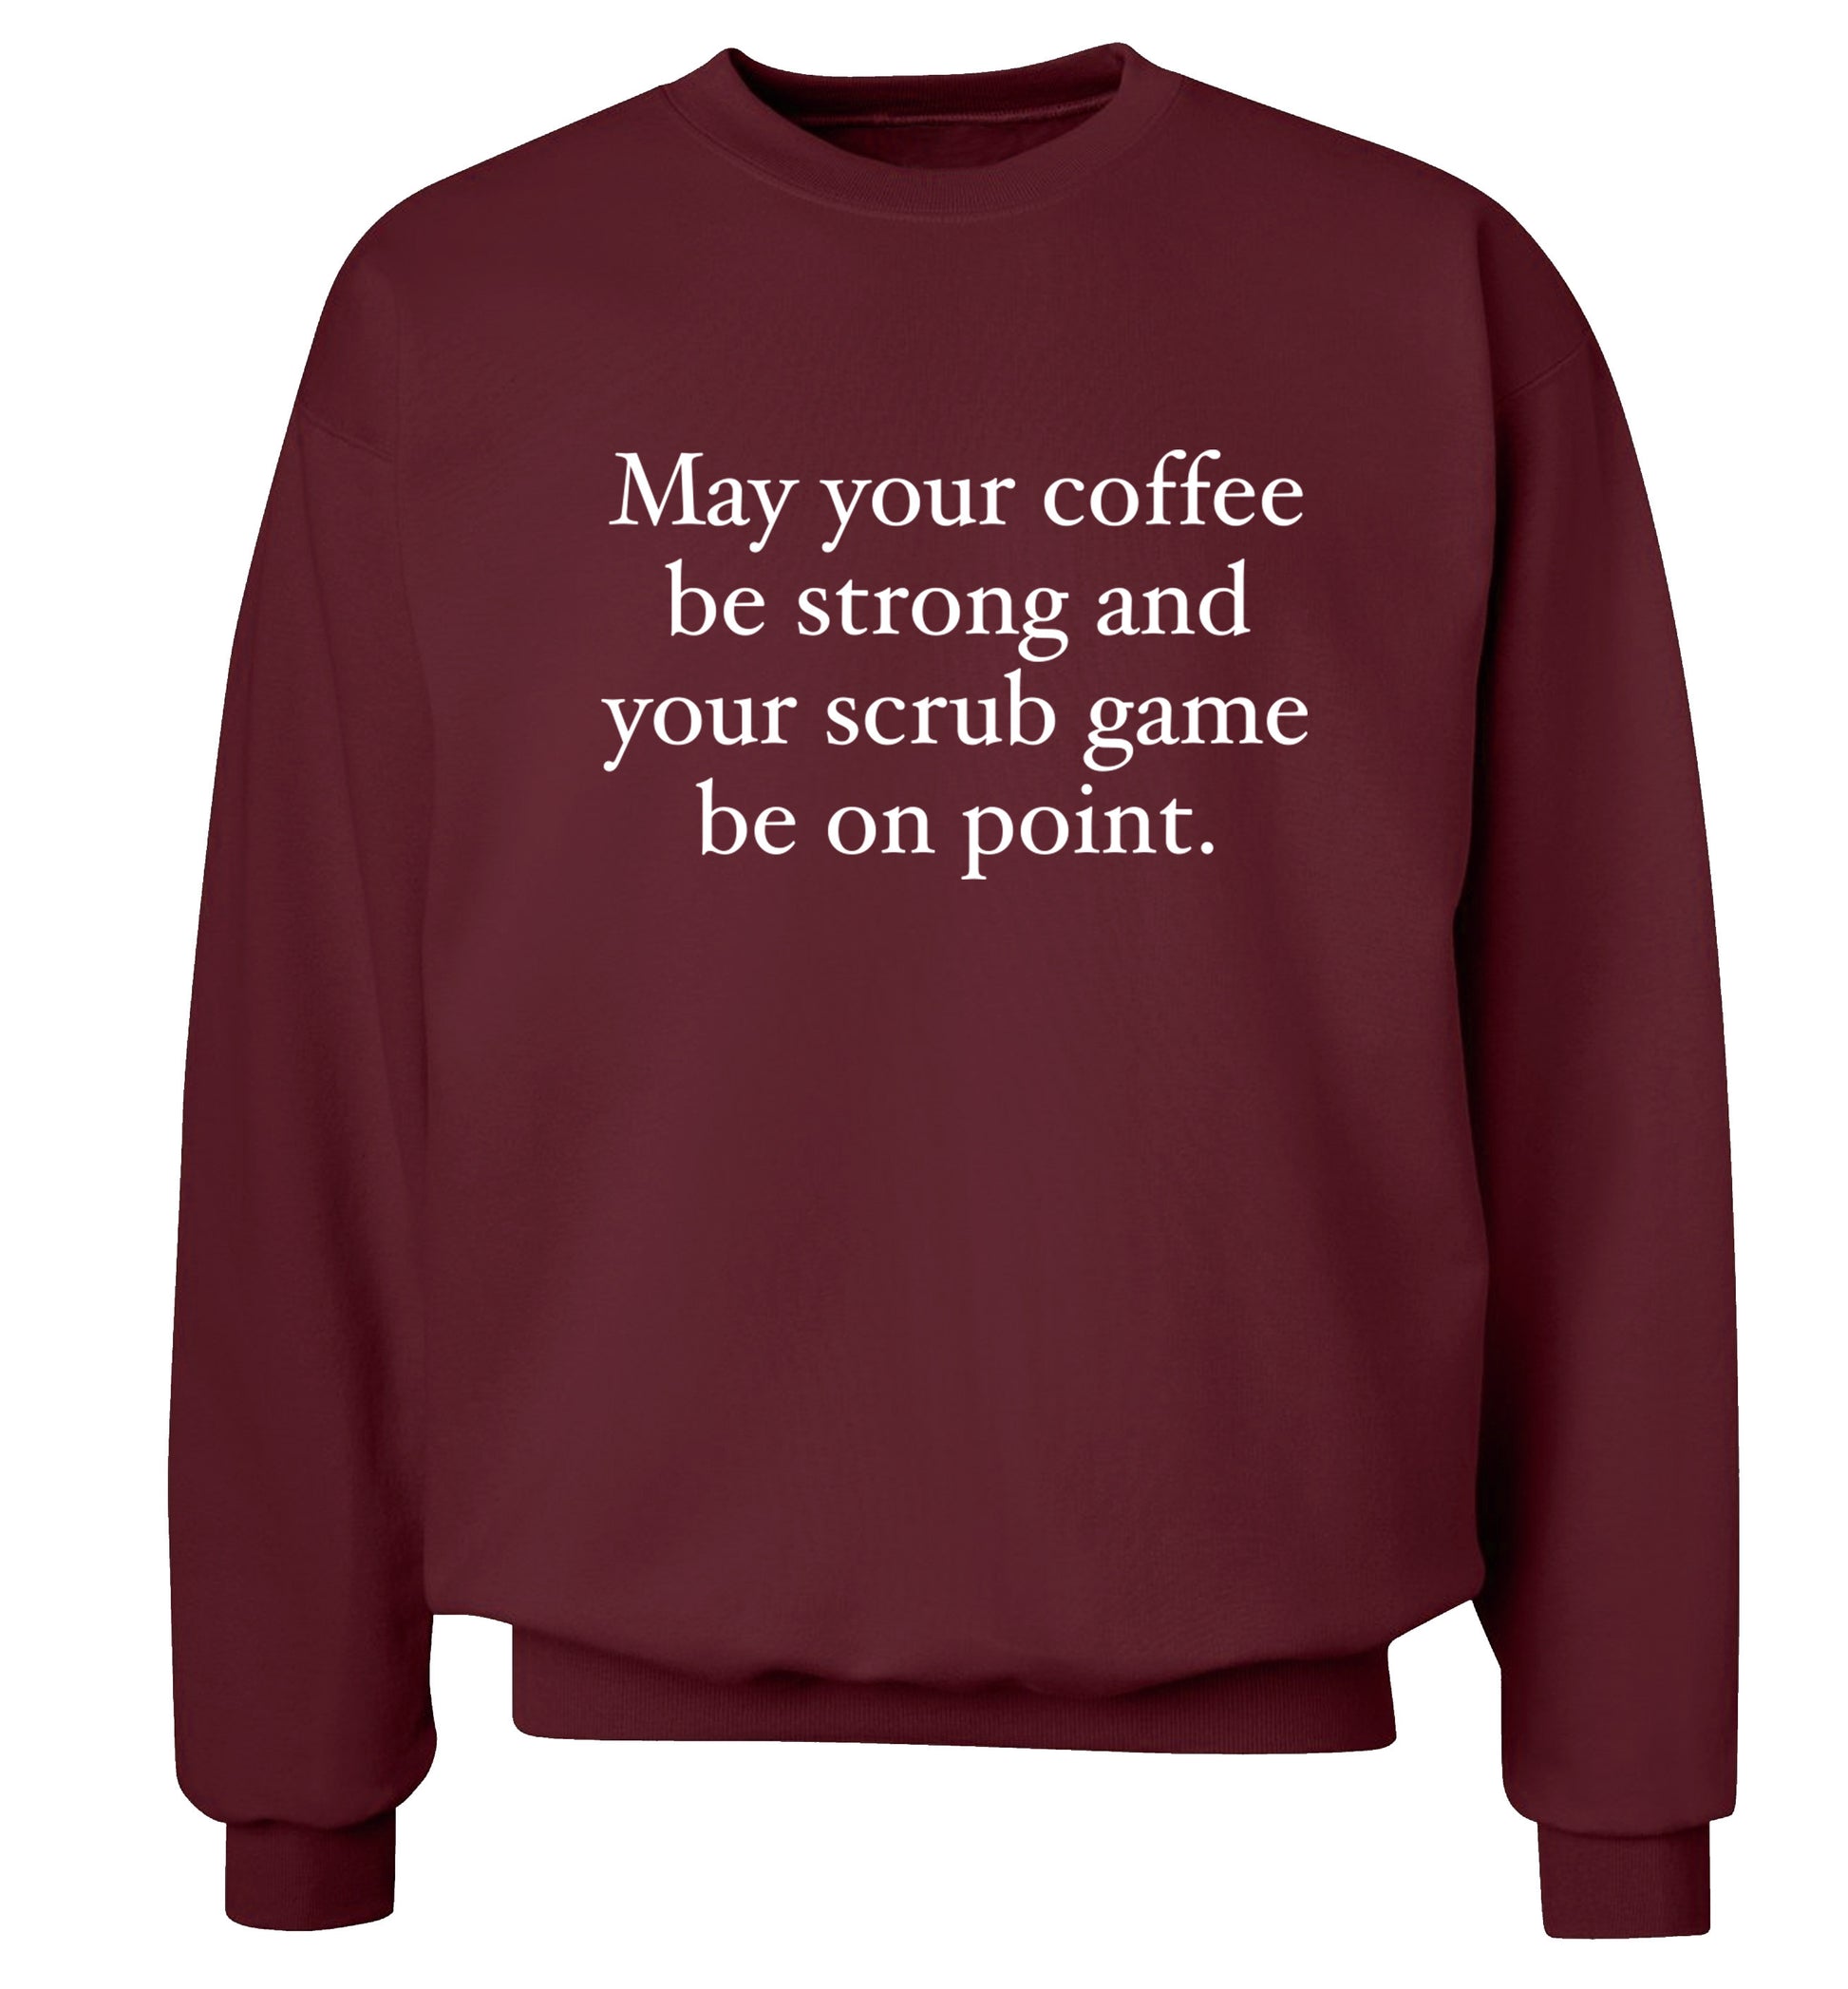 May your caffeine be strong and your scrub game be on point Adult's unisex maroon Sweater 2XL